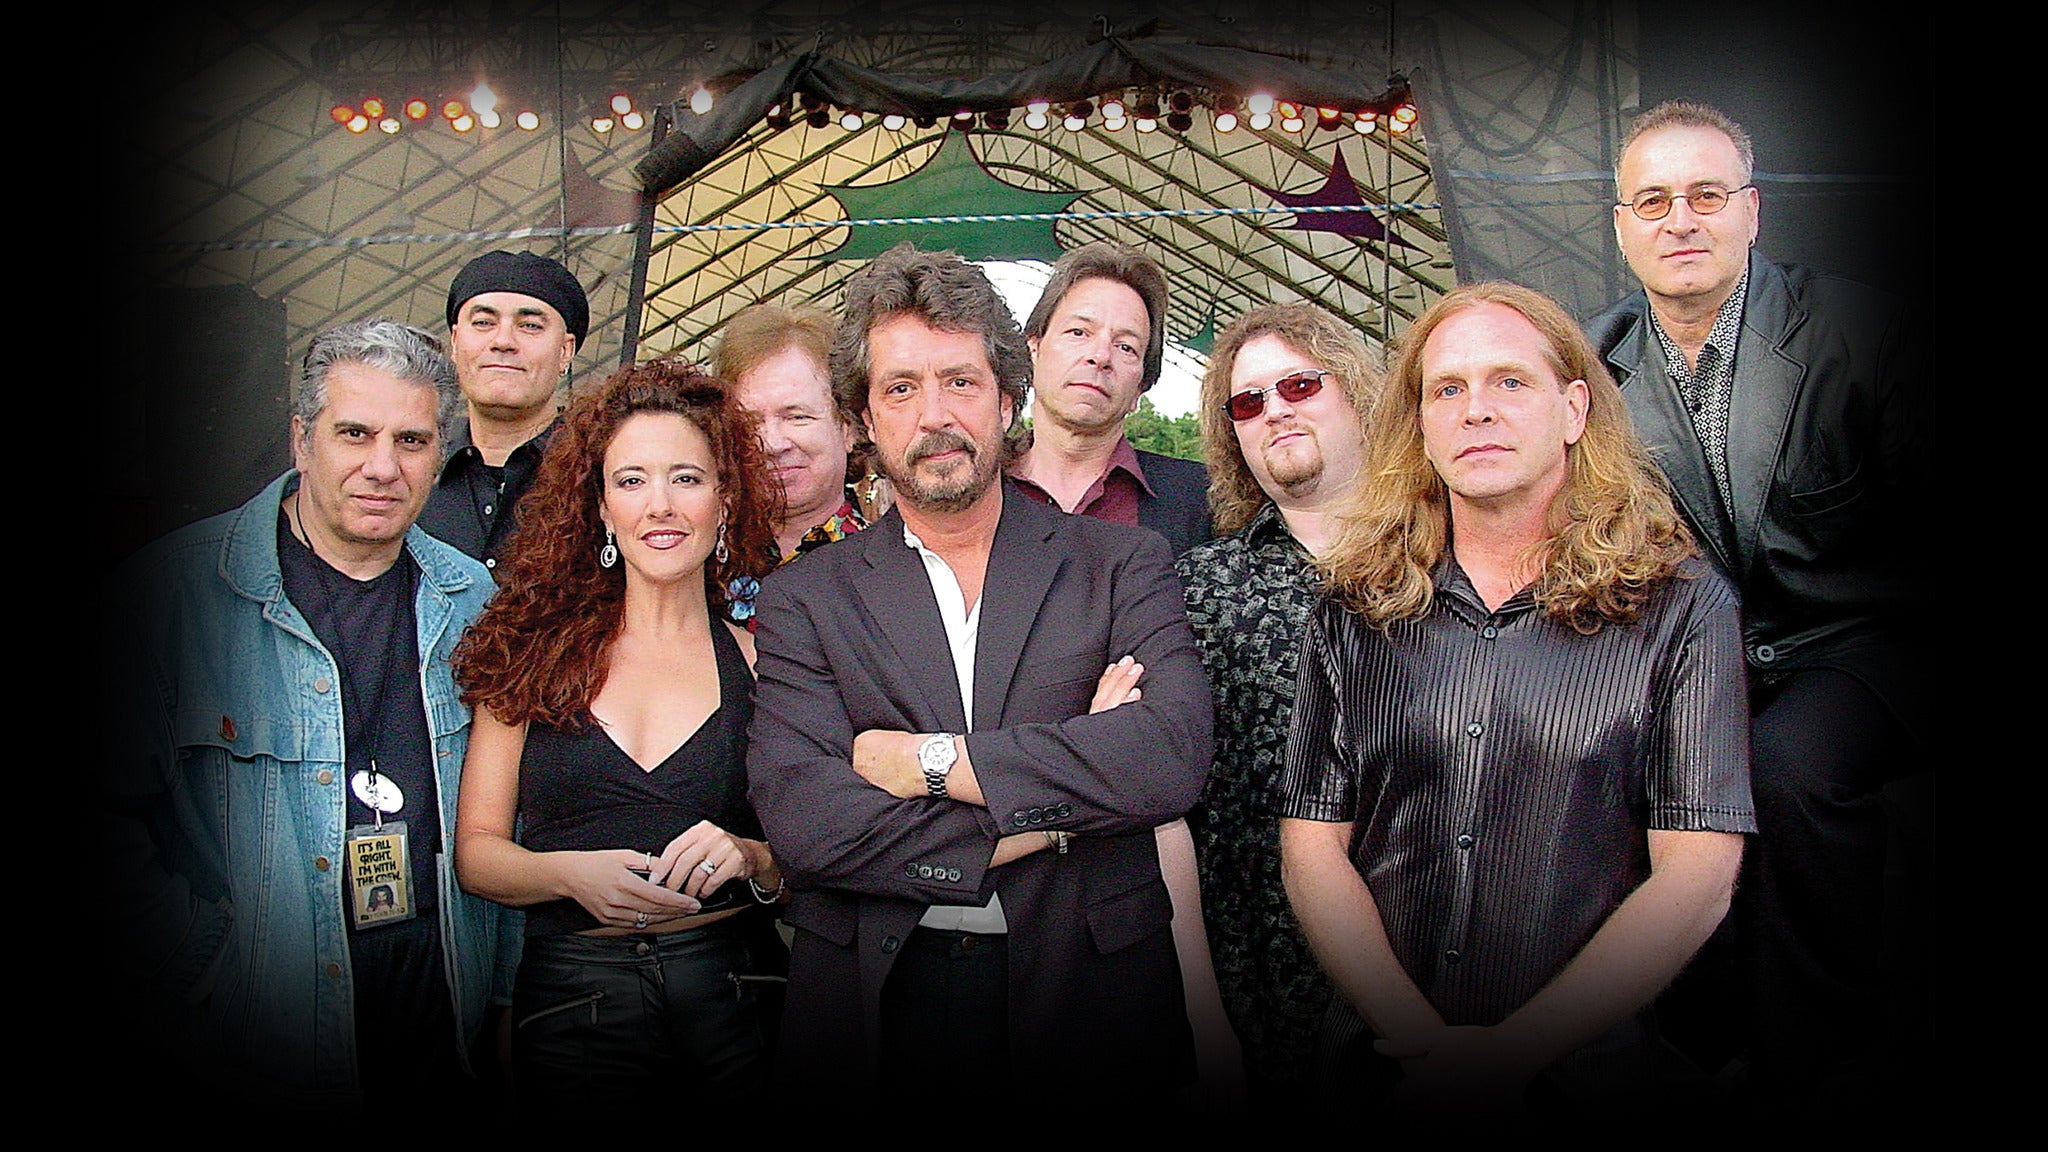 Michael Stanley and the Resonators in Canton promo photo for Official Platinum presale offer code